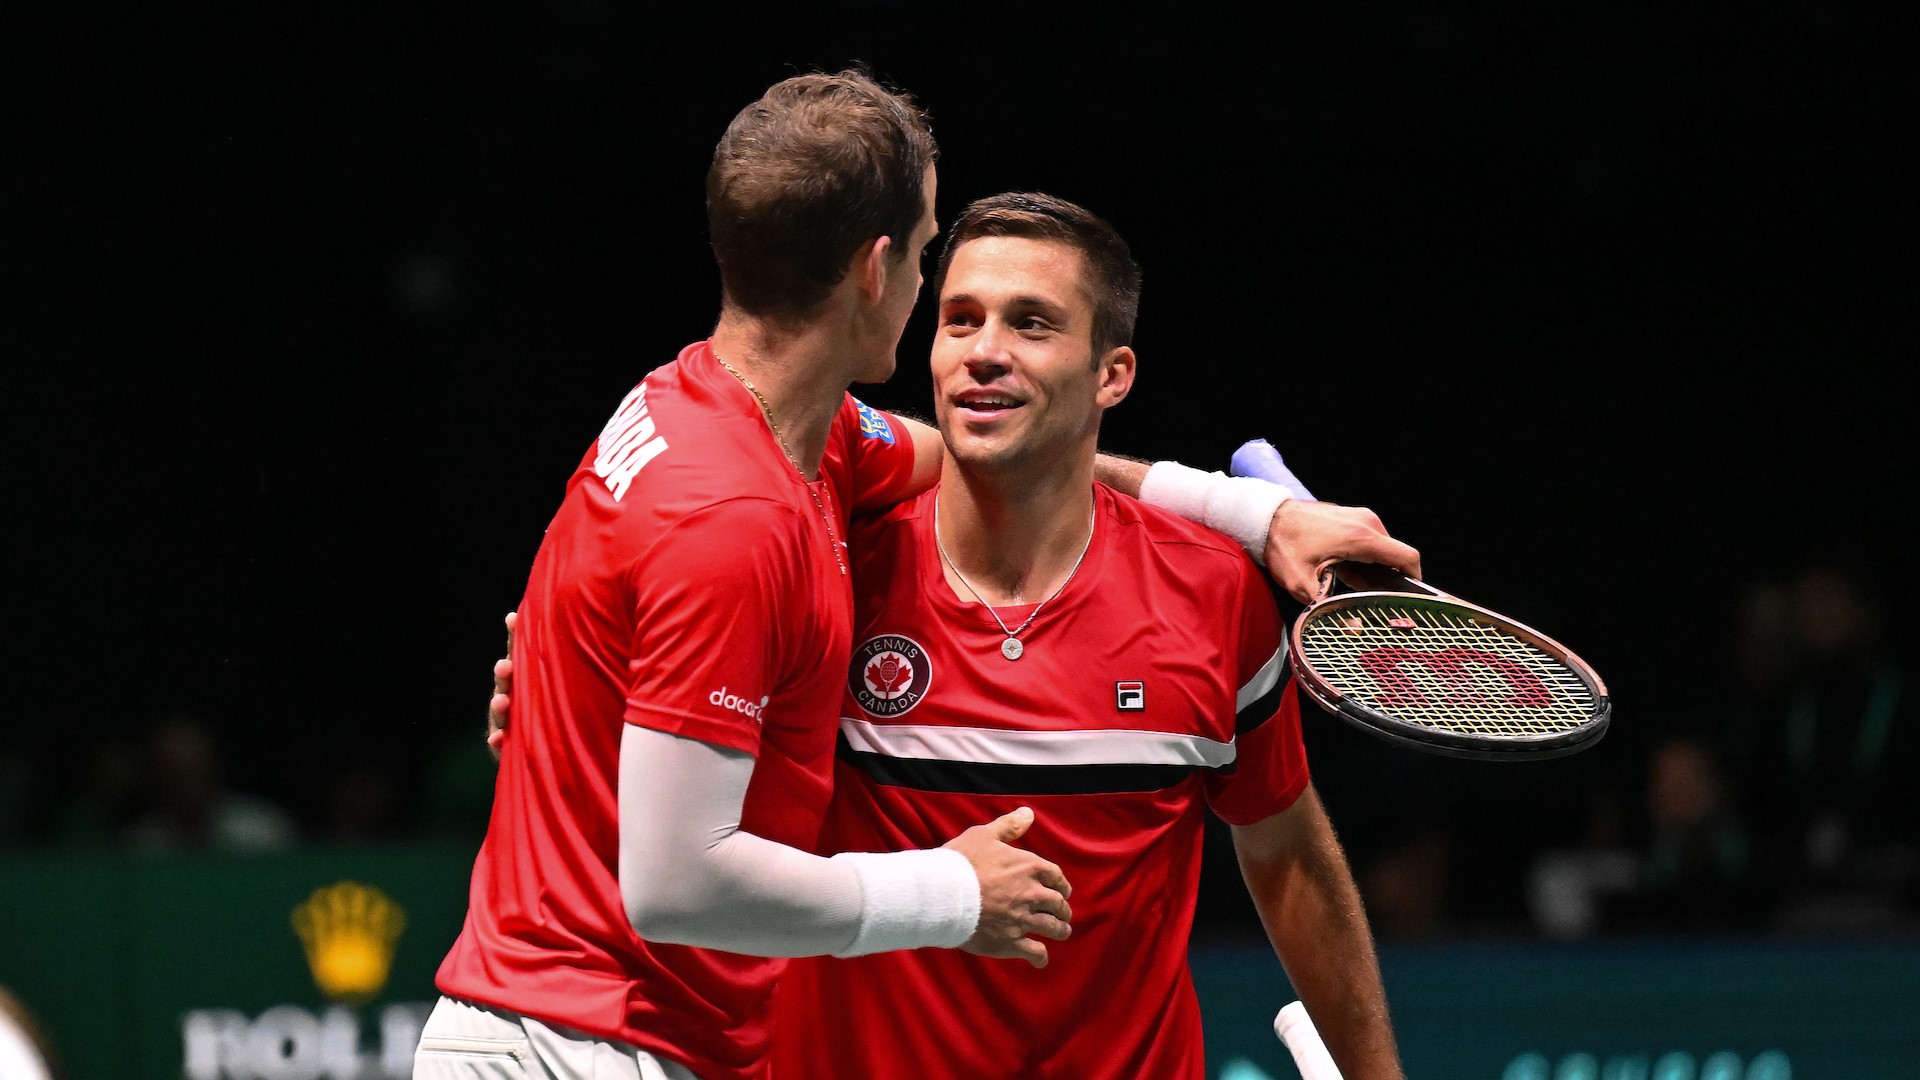 Canada sweeps Italy in opening tie of Davis Cup Finals group stage